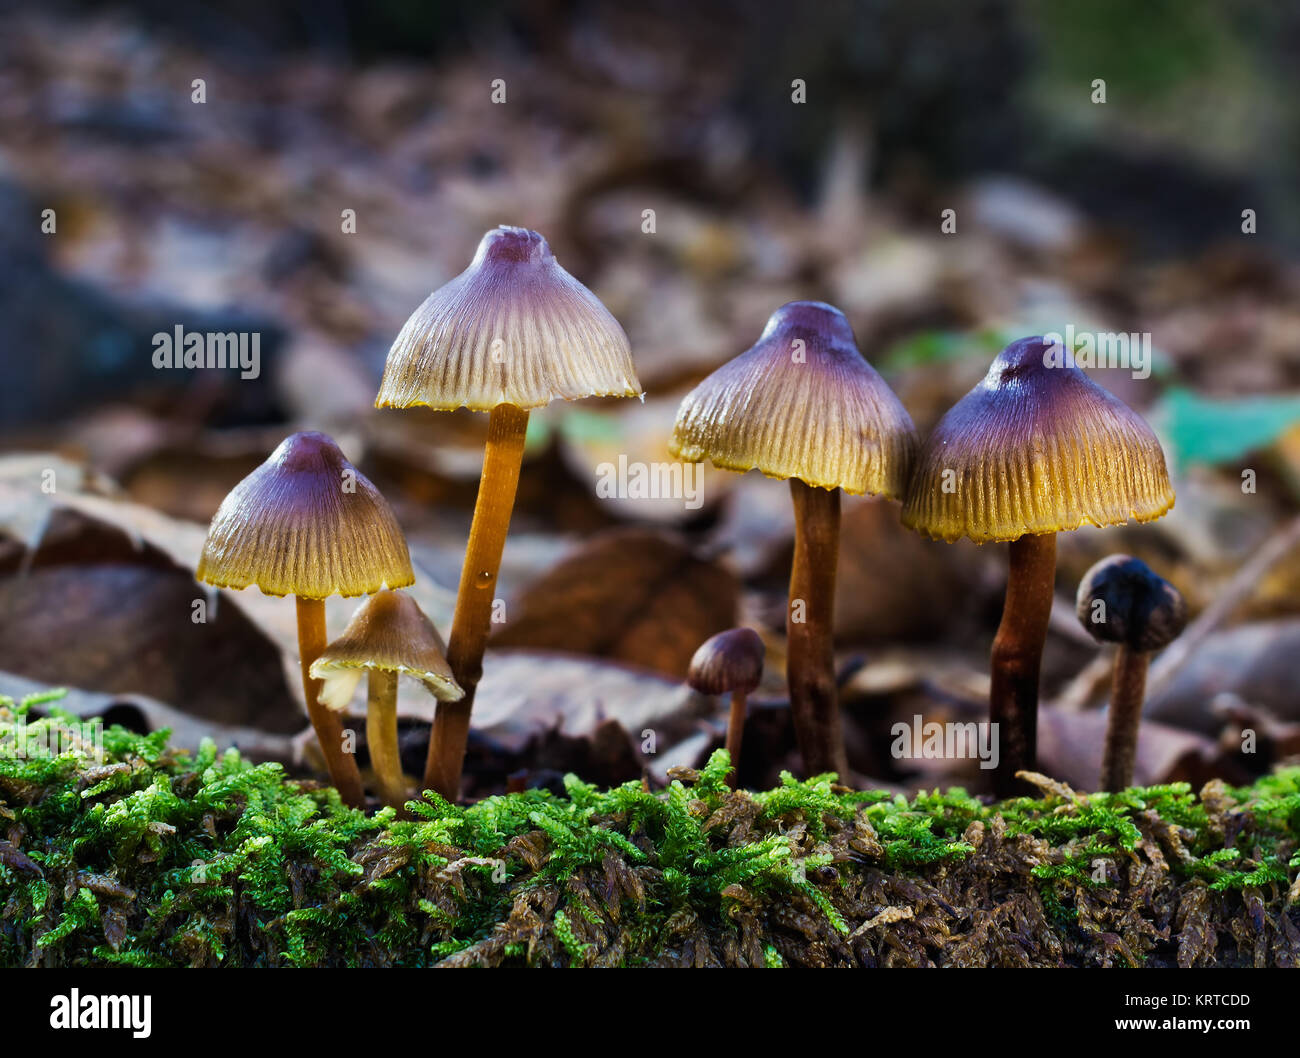 Small mushrooms photographed in a forest of chestnut trees. Stock Photo